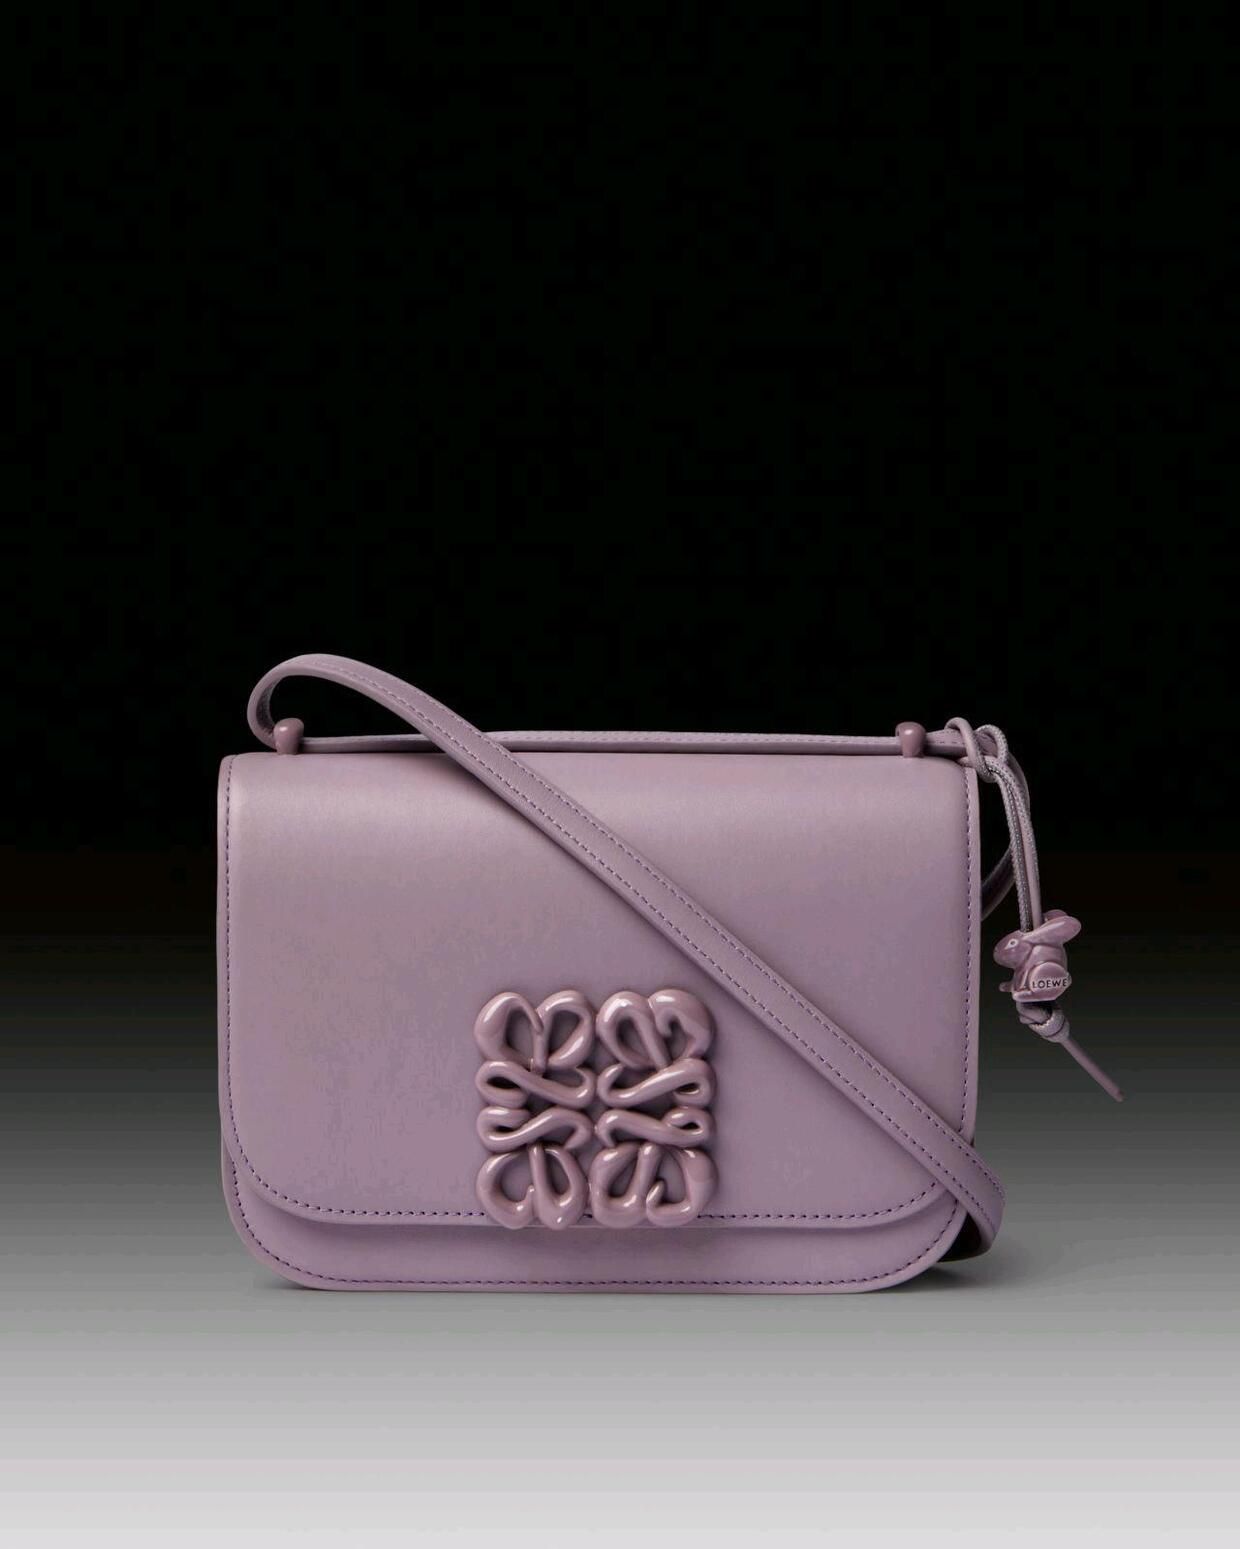 Loewe Chinese Monochrome Collection • Soft Sensibilities.